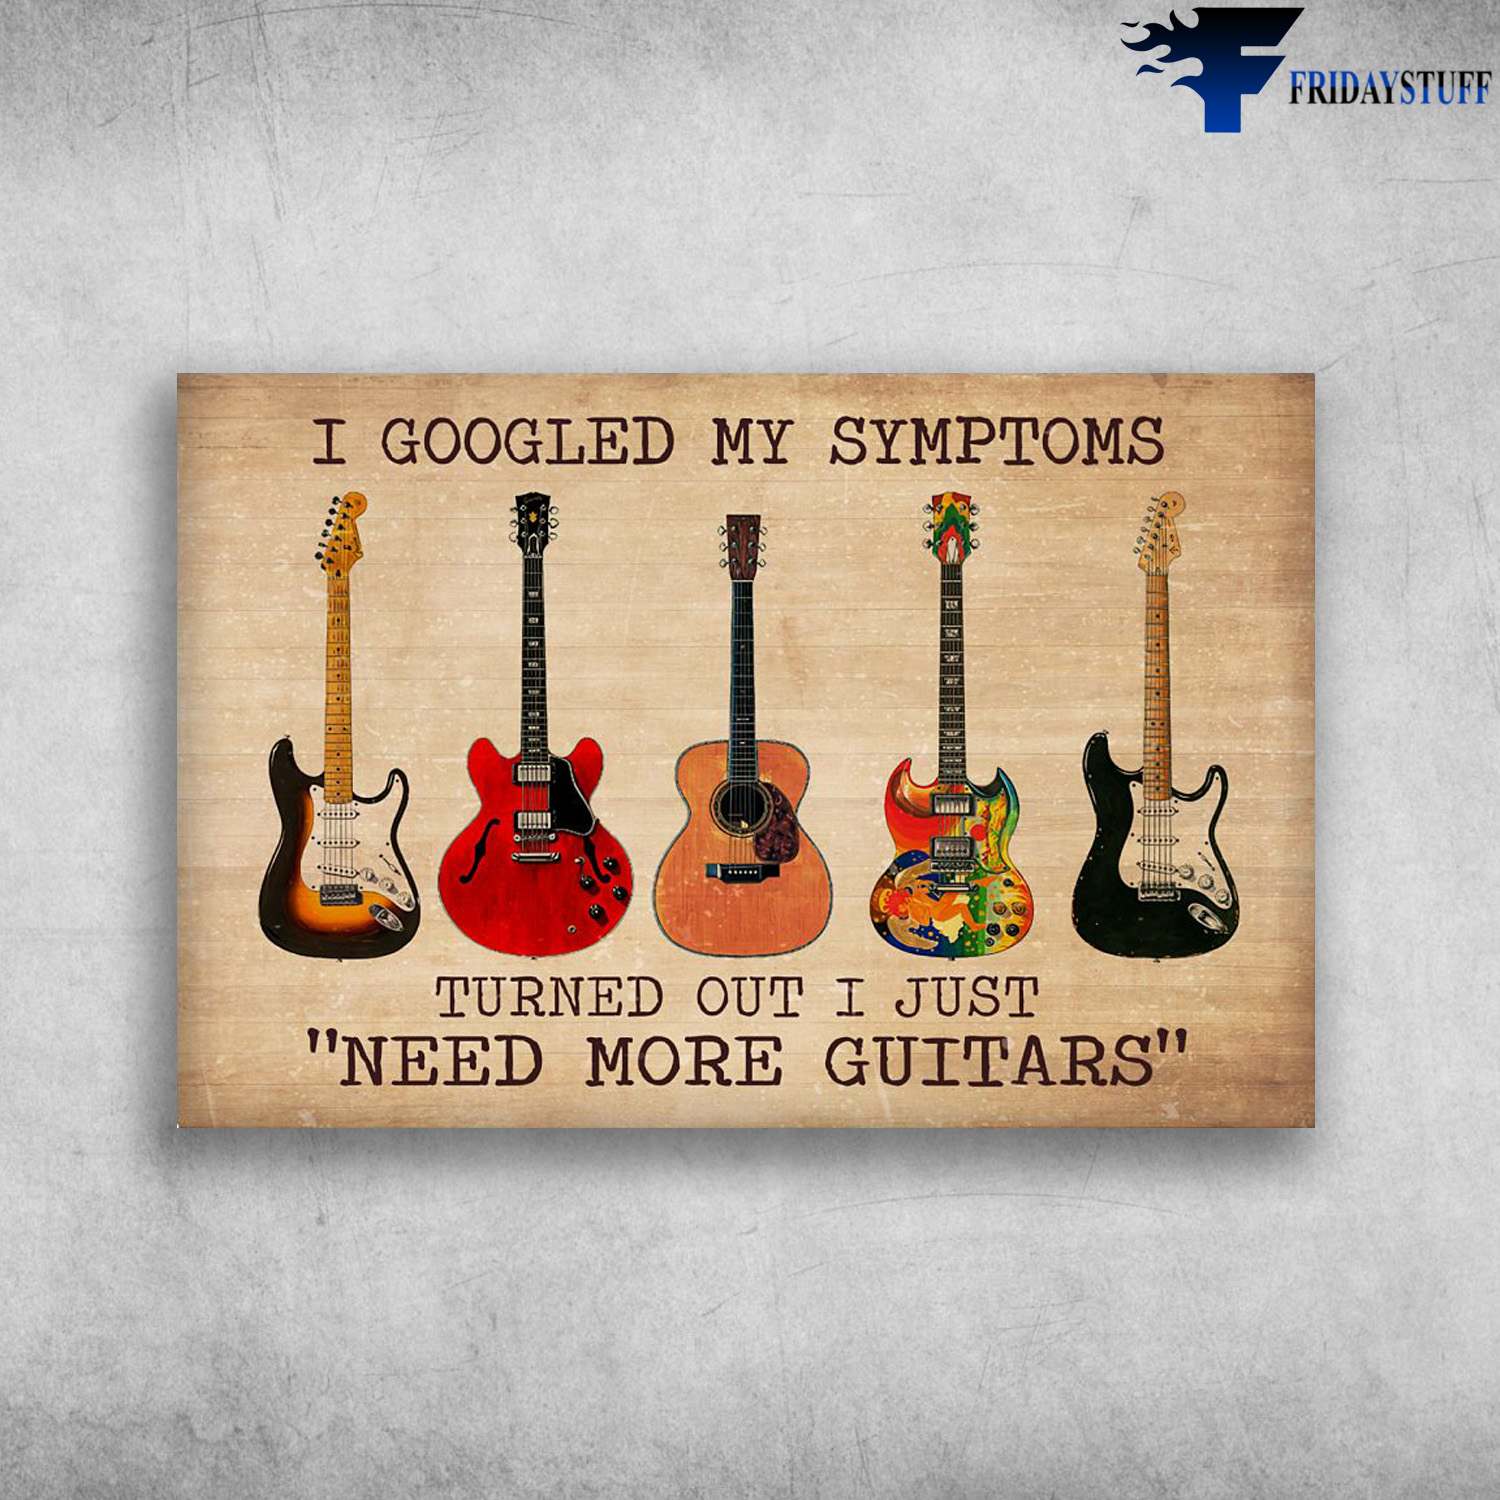 Types Of Guitars - I Googled My Symptoms, Turned Out I Just, Need More Guitars